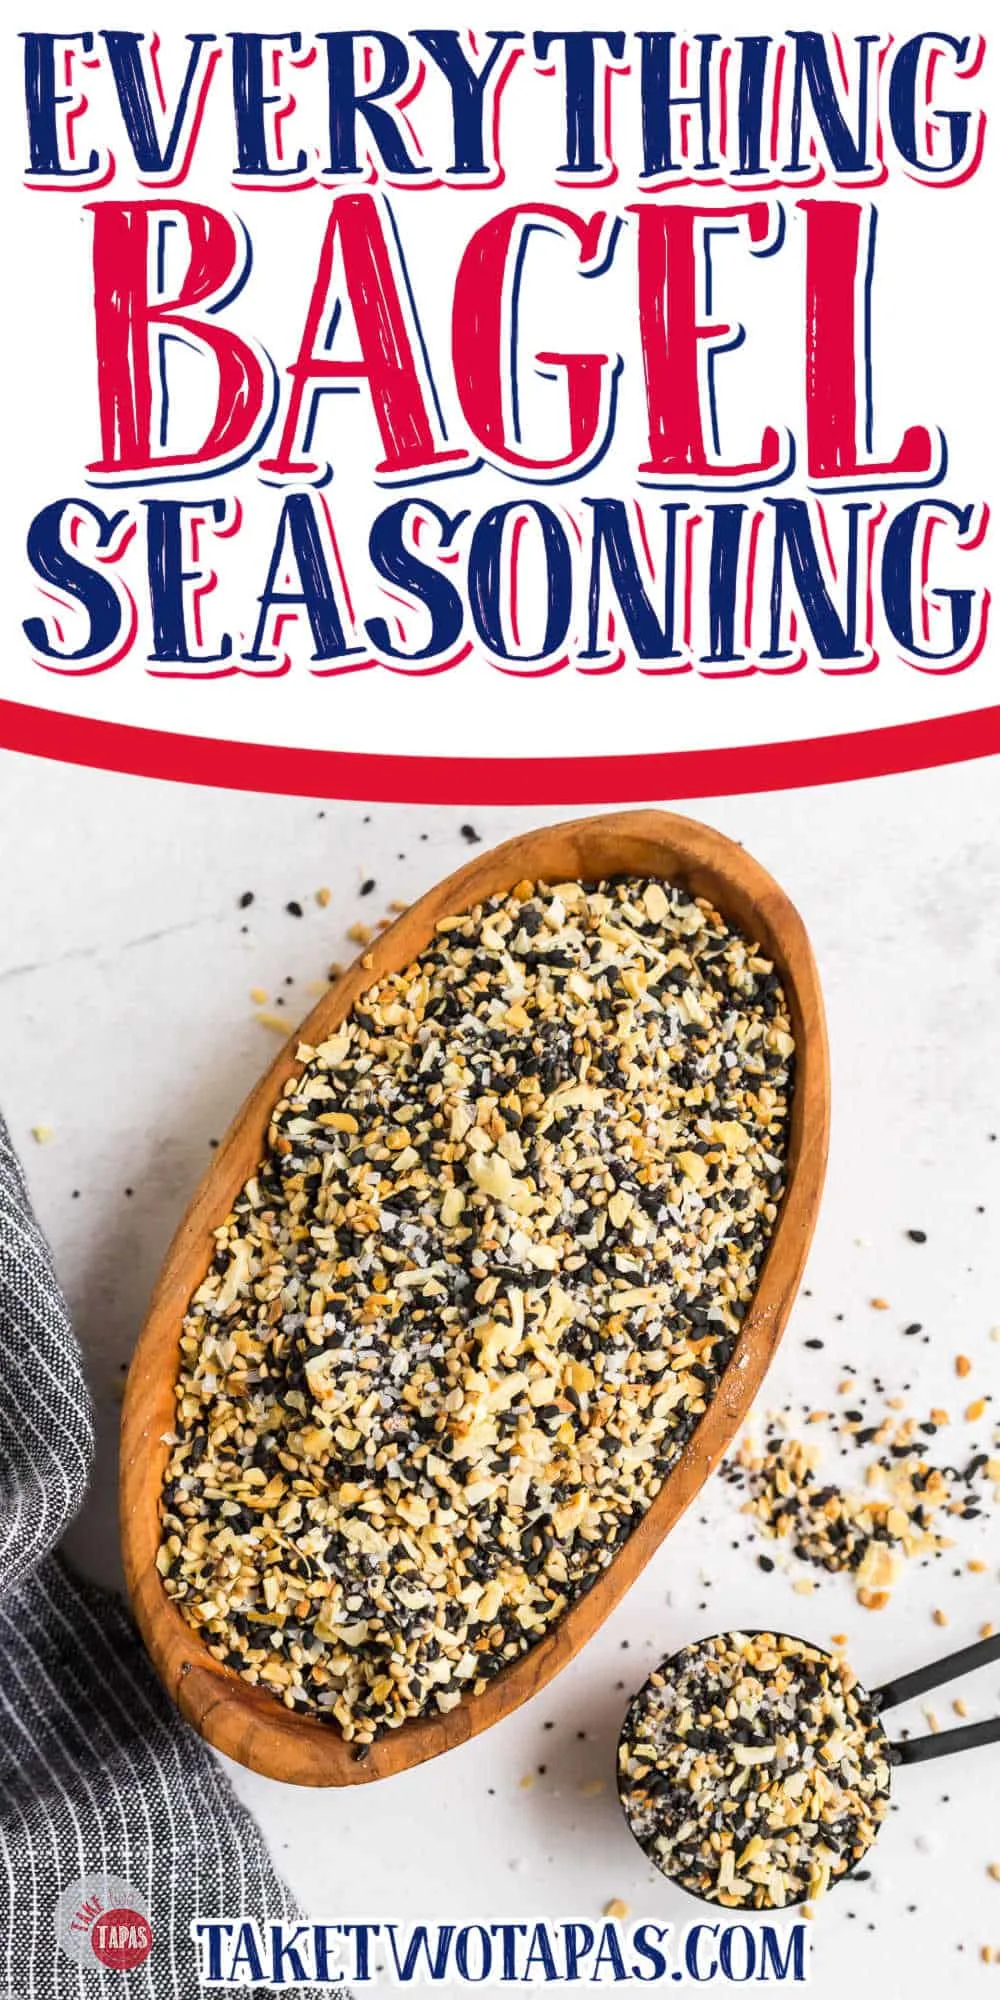 How to Make the Best Everything Bagel Seasoning - Perry's Plate